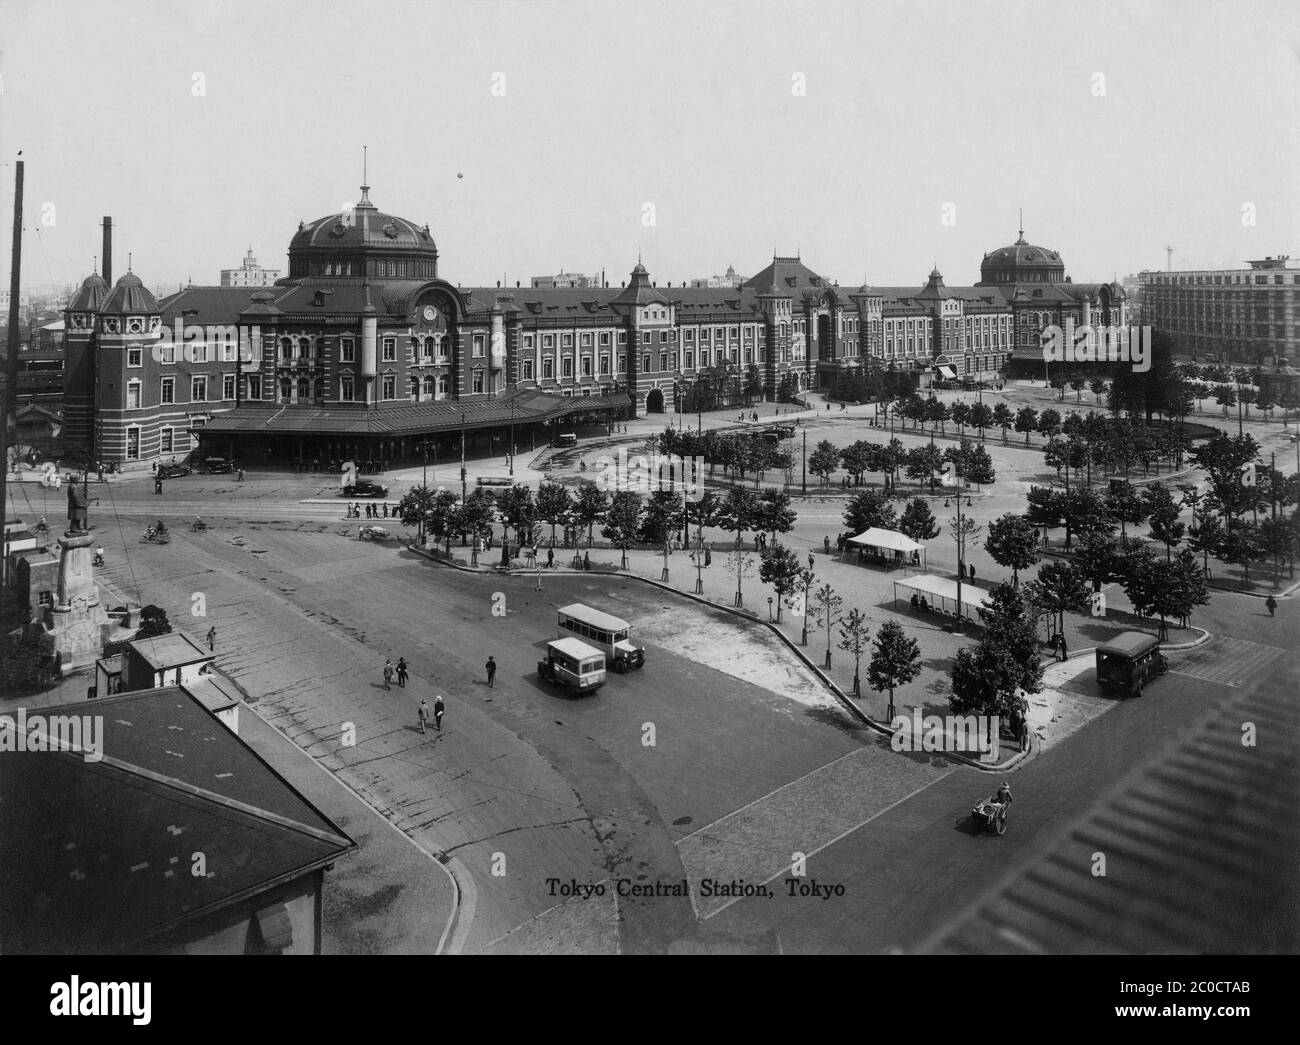 [ 1930s Japan - Tokyo Station ] — Tokyo Station, located in the Marunouchi business district of Tokyo, near the Imperial Palace grounds and the Ginza commercial district. Early 1930s.  The building was designed by architect Kingo Tatsuno (辰野金吾, 1854–1919) to celebrate Japan’s victory in the Russo-Japanese War. He patterned the domes, destroyed during the firebombings of 1945 (Showa 20), after Amsterdam’s central station.  The station was completed on December 18, 1914 (Taisho 3), and opened on the 20th.  20th century vintage gelatin silver print. Stock Photo